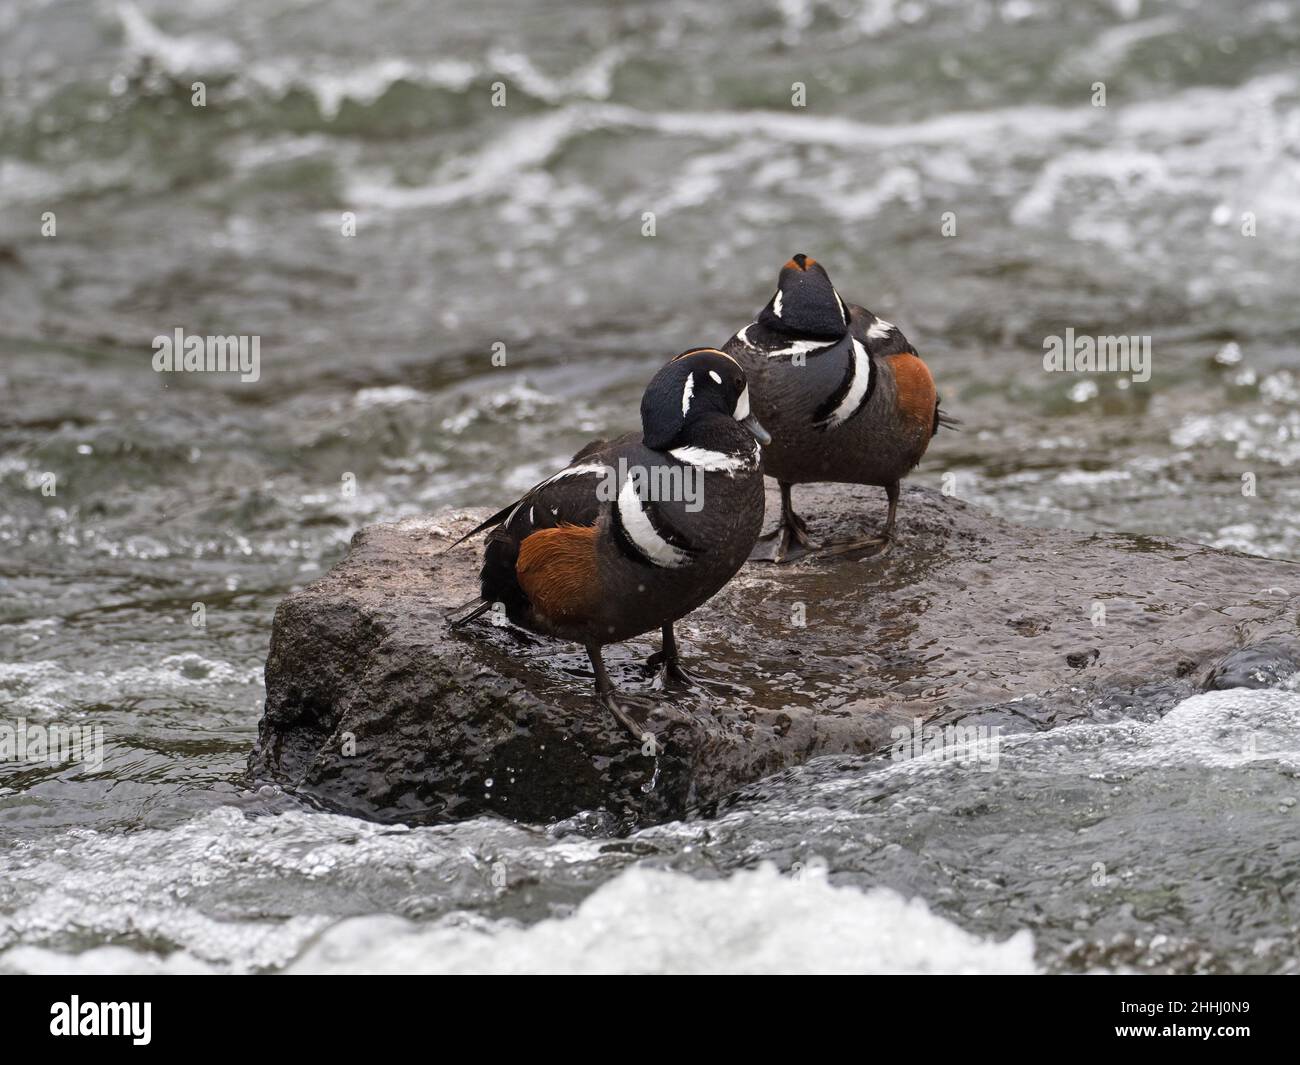 Harlequin duck Histrionicus histrionicus two males on a rock, LeHardy Rapids, Yellowstone River, Yellowstone National Park, Wyoming, USA, June 2019 Stock Photo